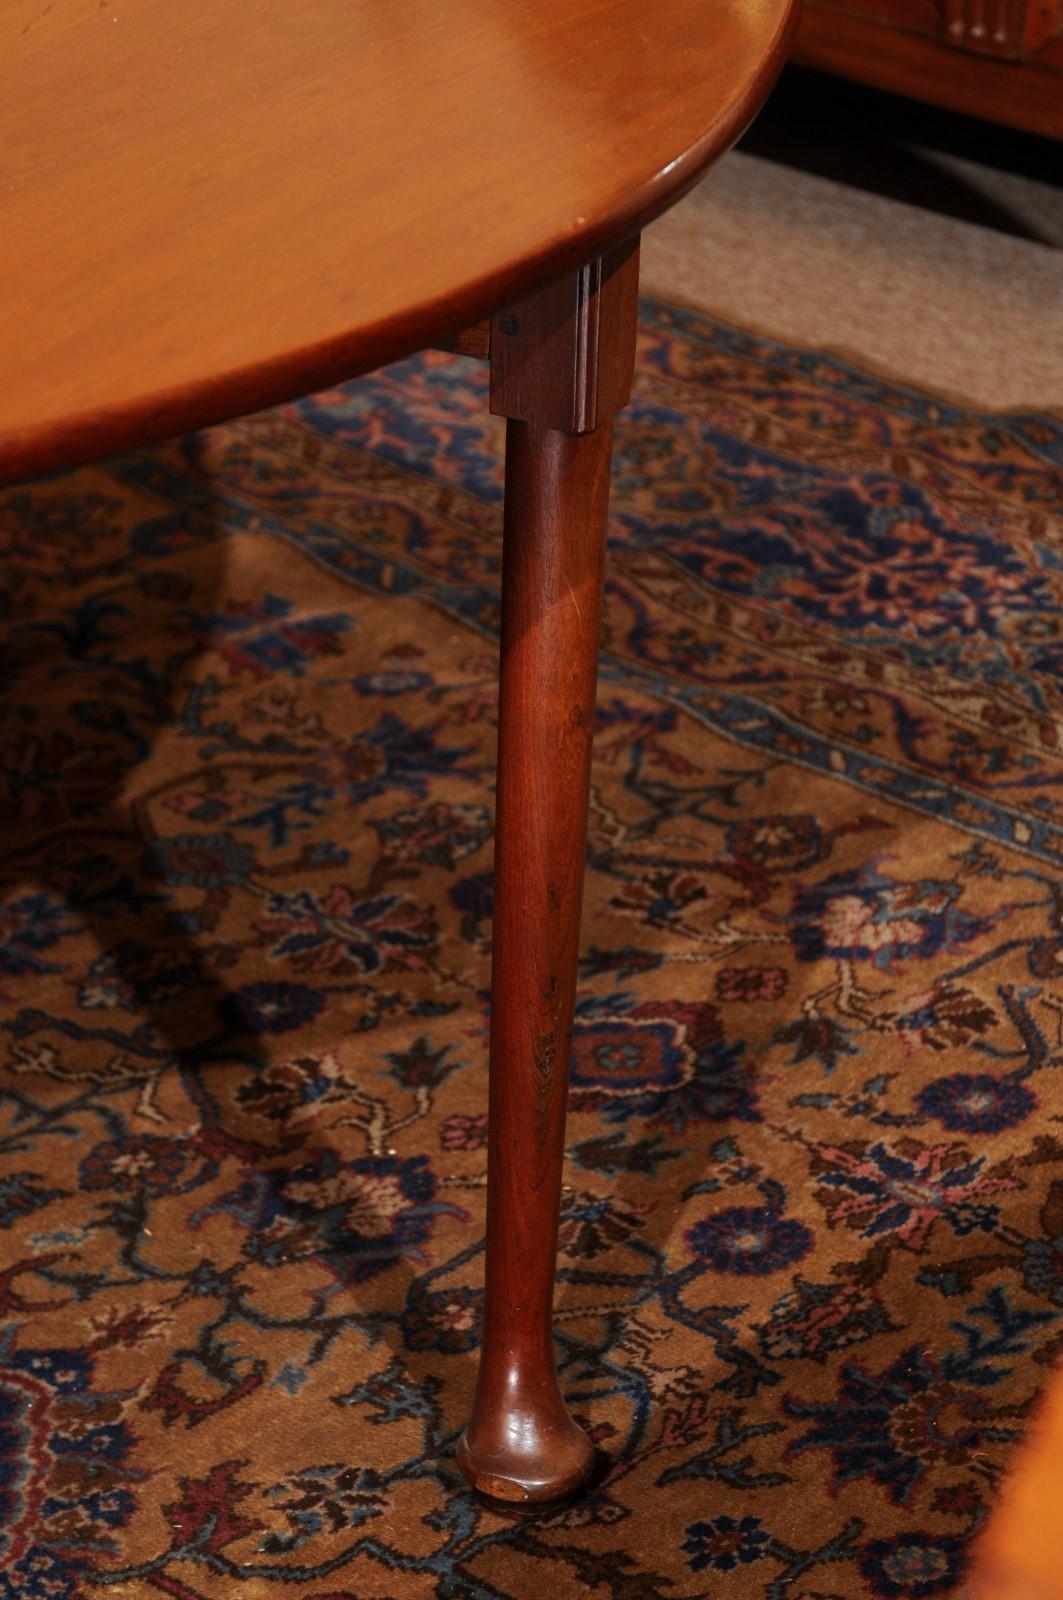  Mid-18th C English George II Mahogany Drop Leaf Oval Dining Table with Pad Feet For Sale 2